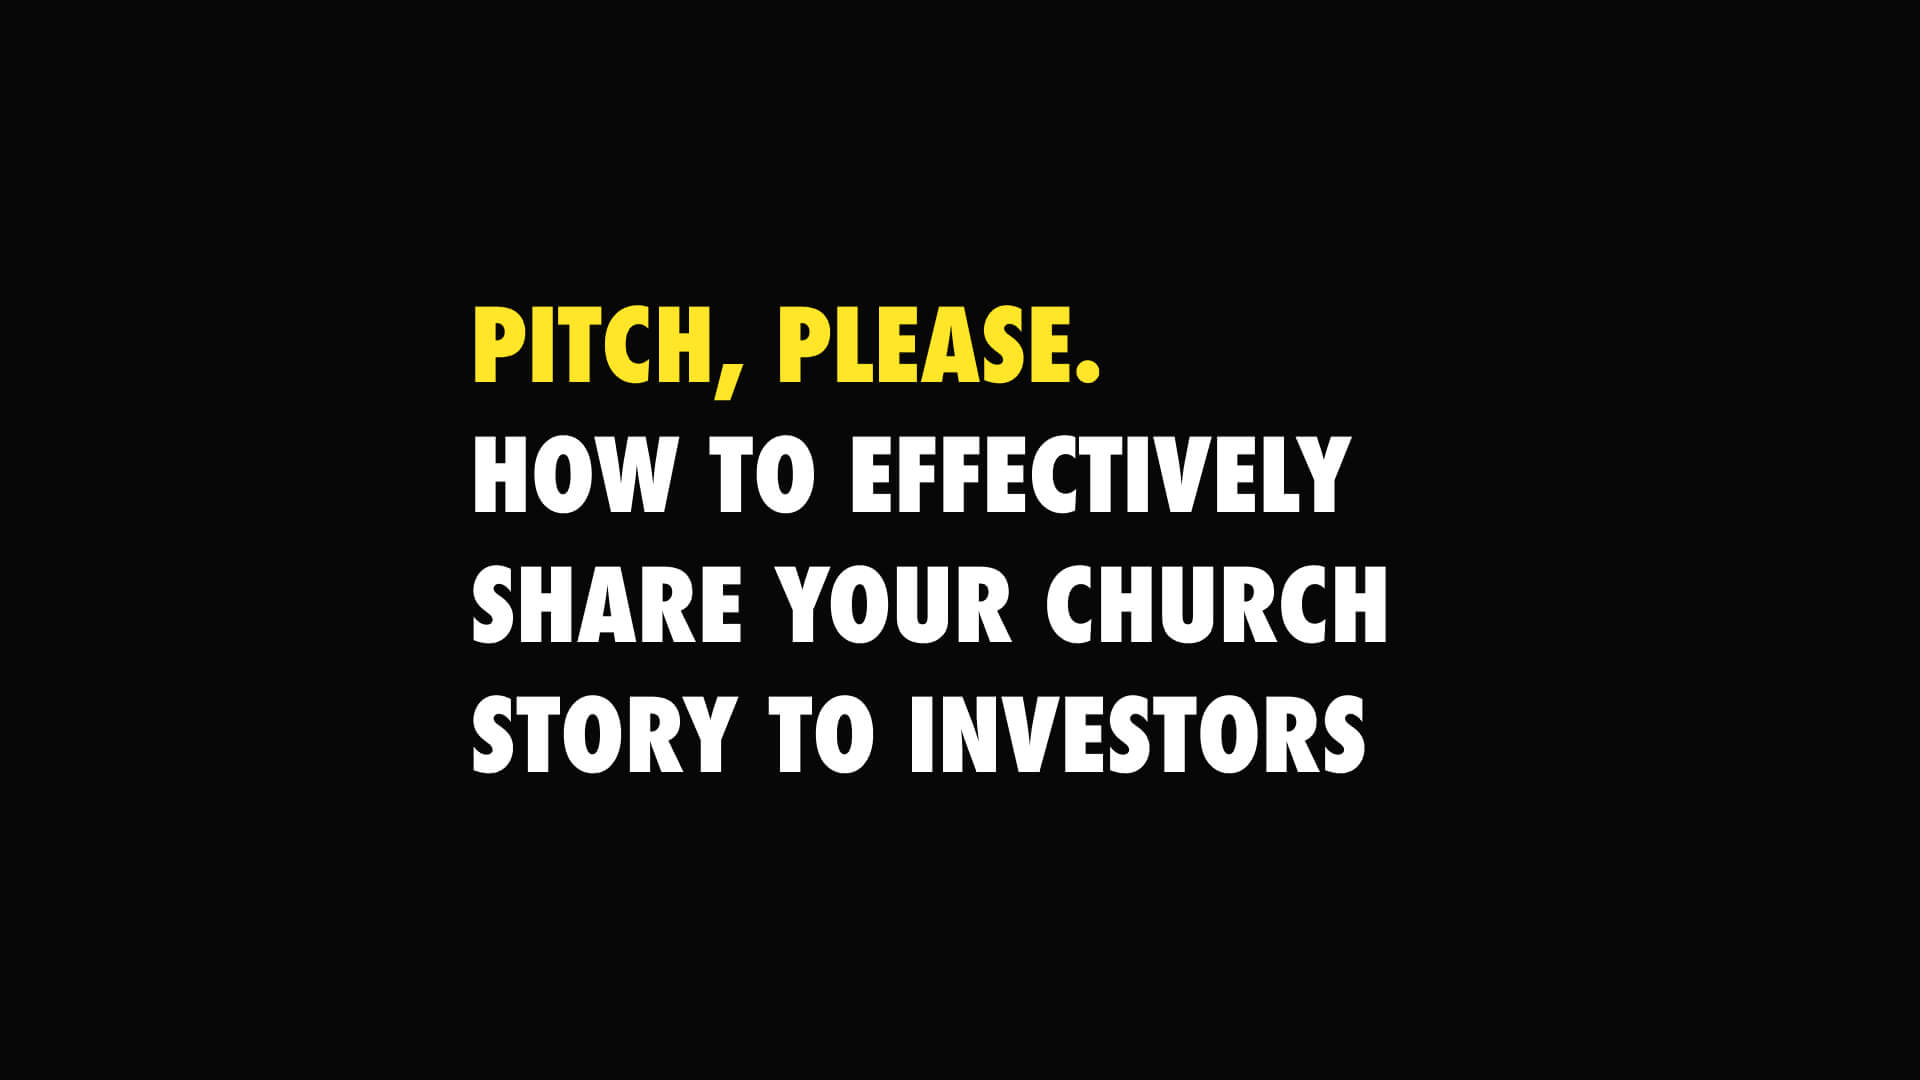 How to Effectively Share Your Church Story to Investors